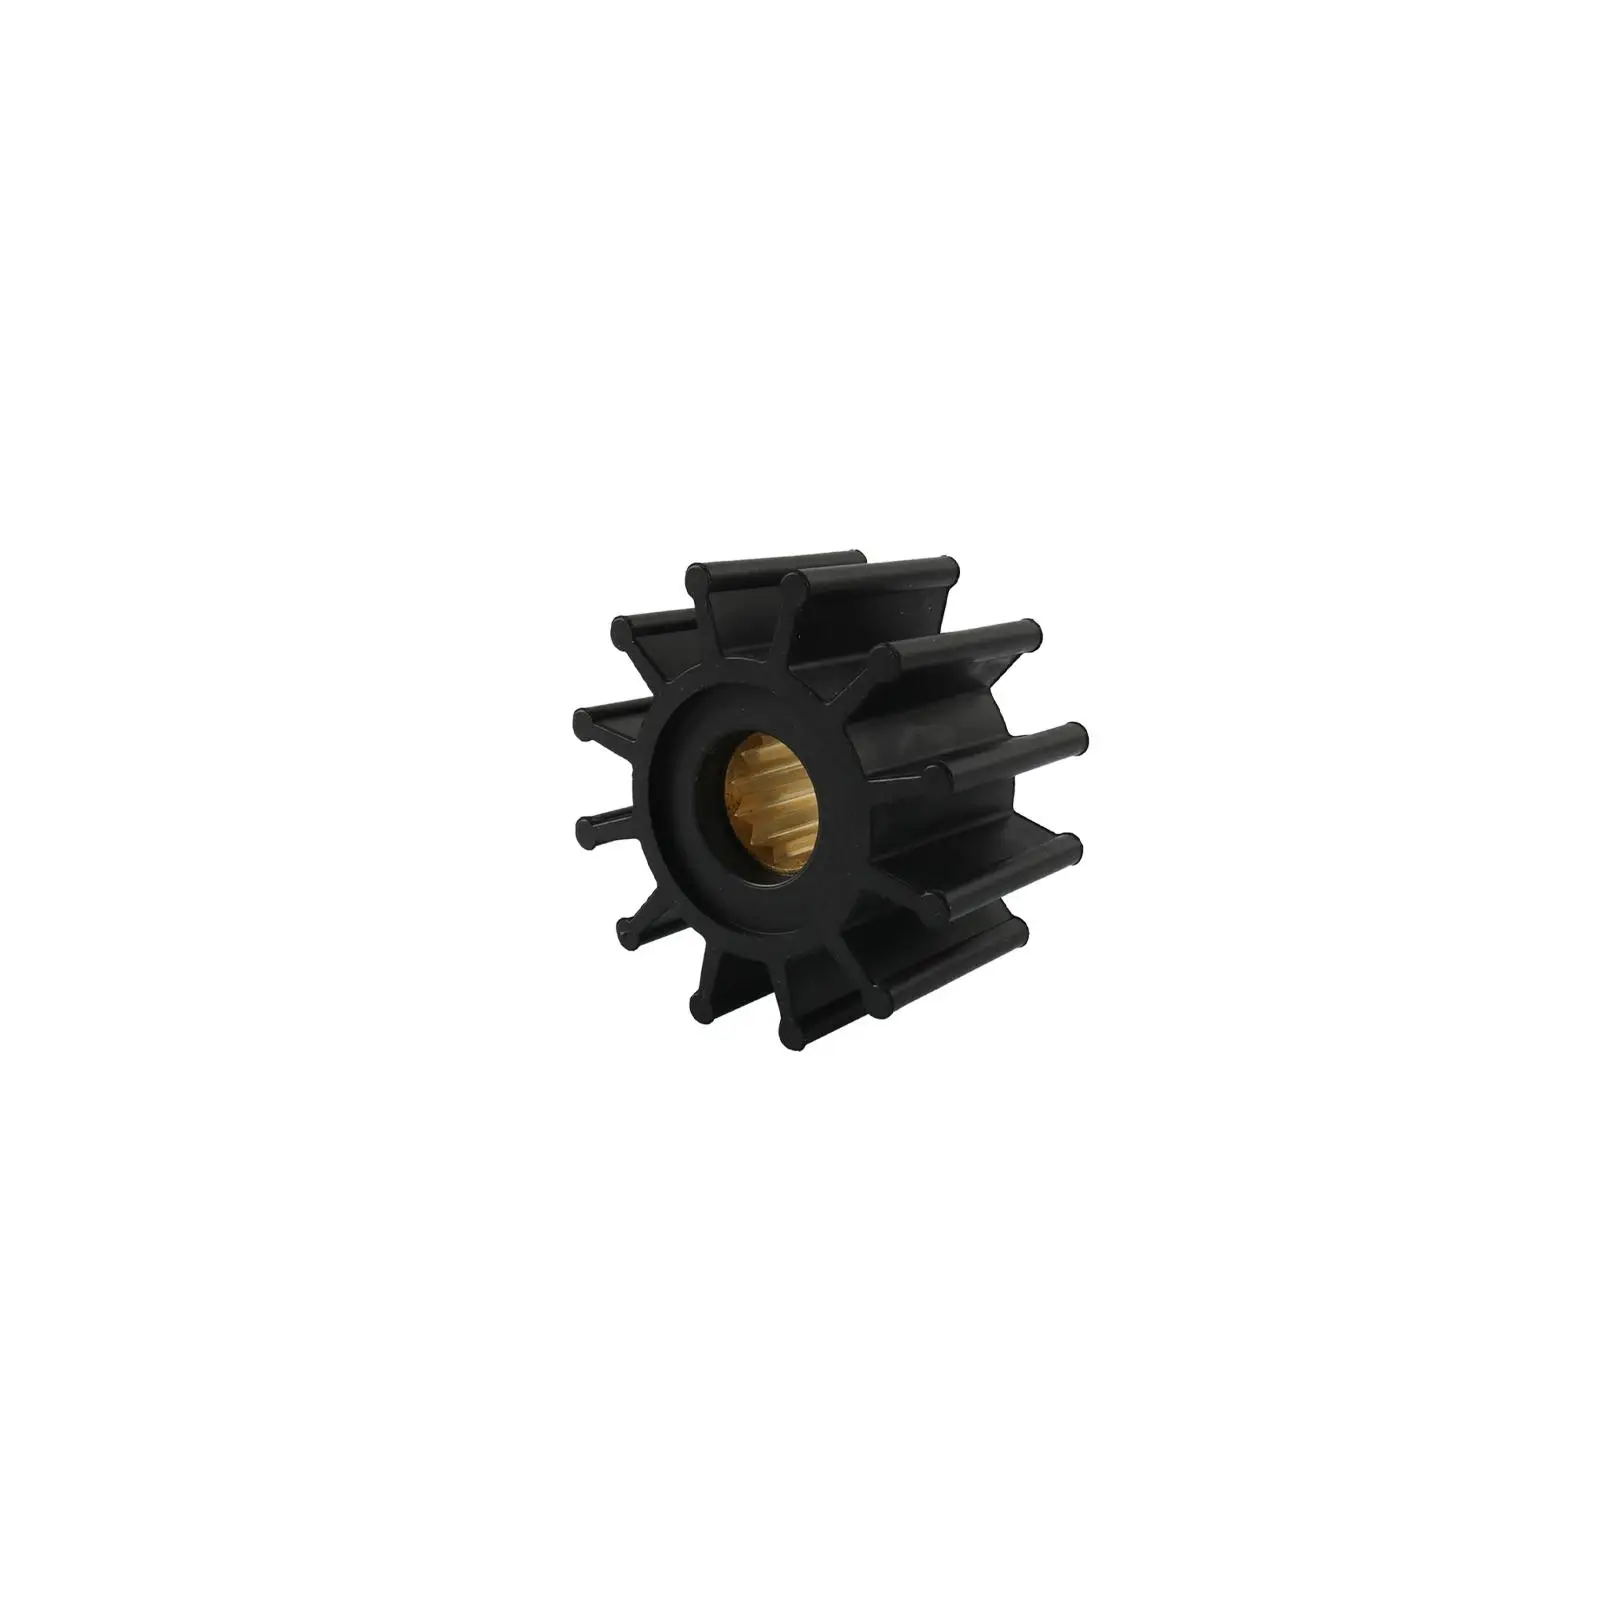 Water Pump Impeller for Volvo Penta 2195134 Boat Engine Water Pump Impeller Engine Parts Spare Parts Accessories Easy to Install